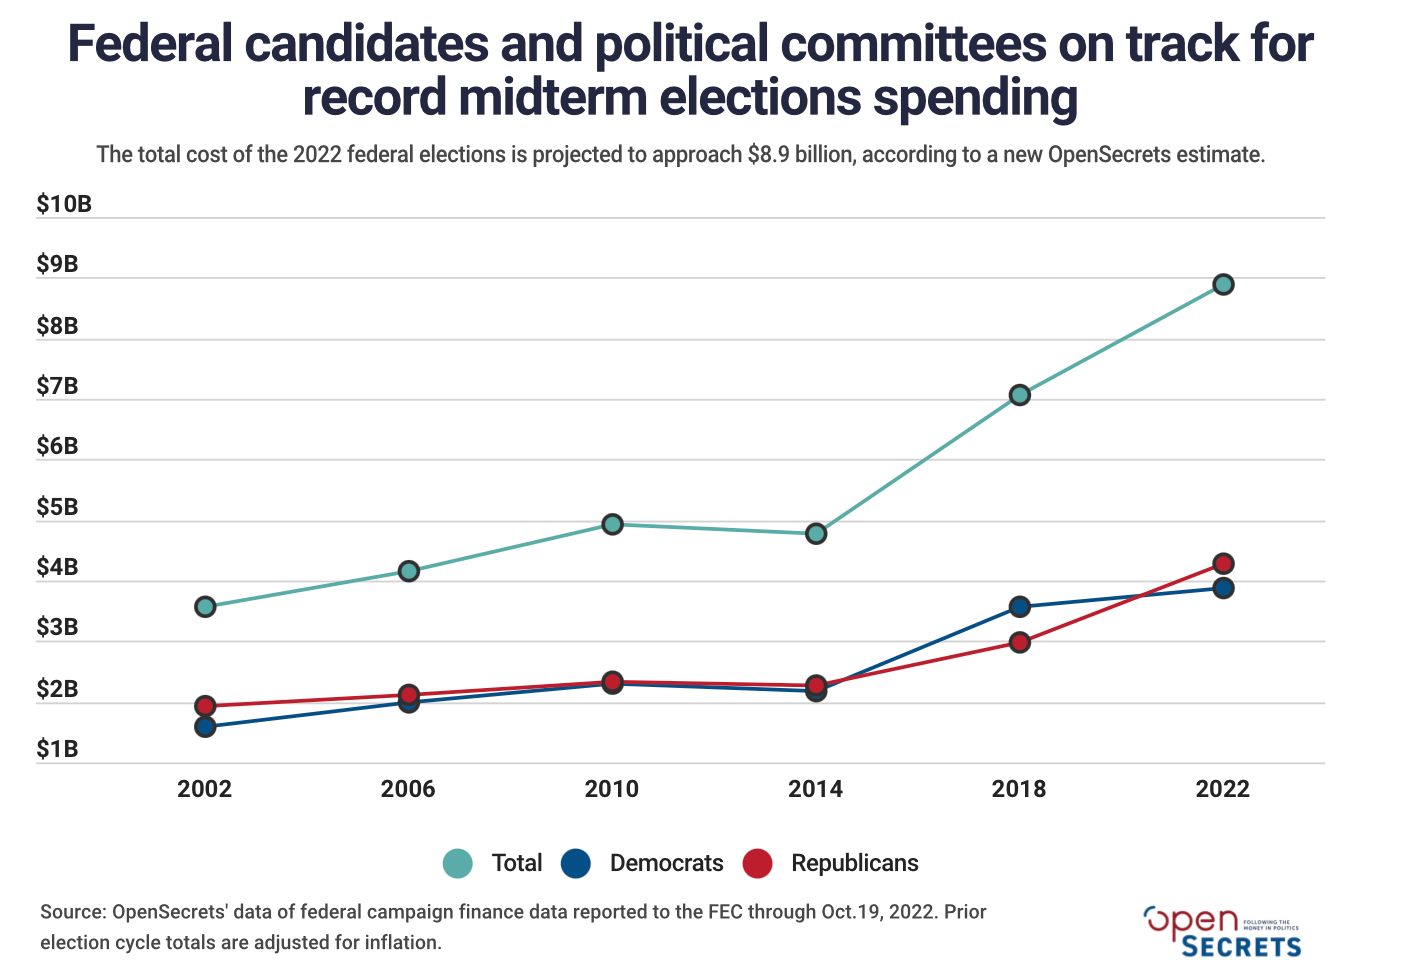 Inflation-adjusted data from the Federal Election Commission shows the rapid increase in campaign spending by both parties